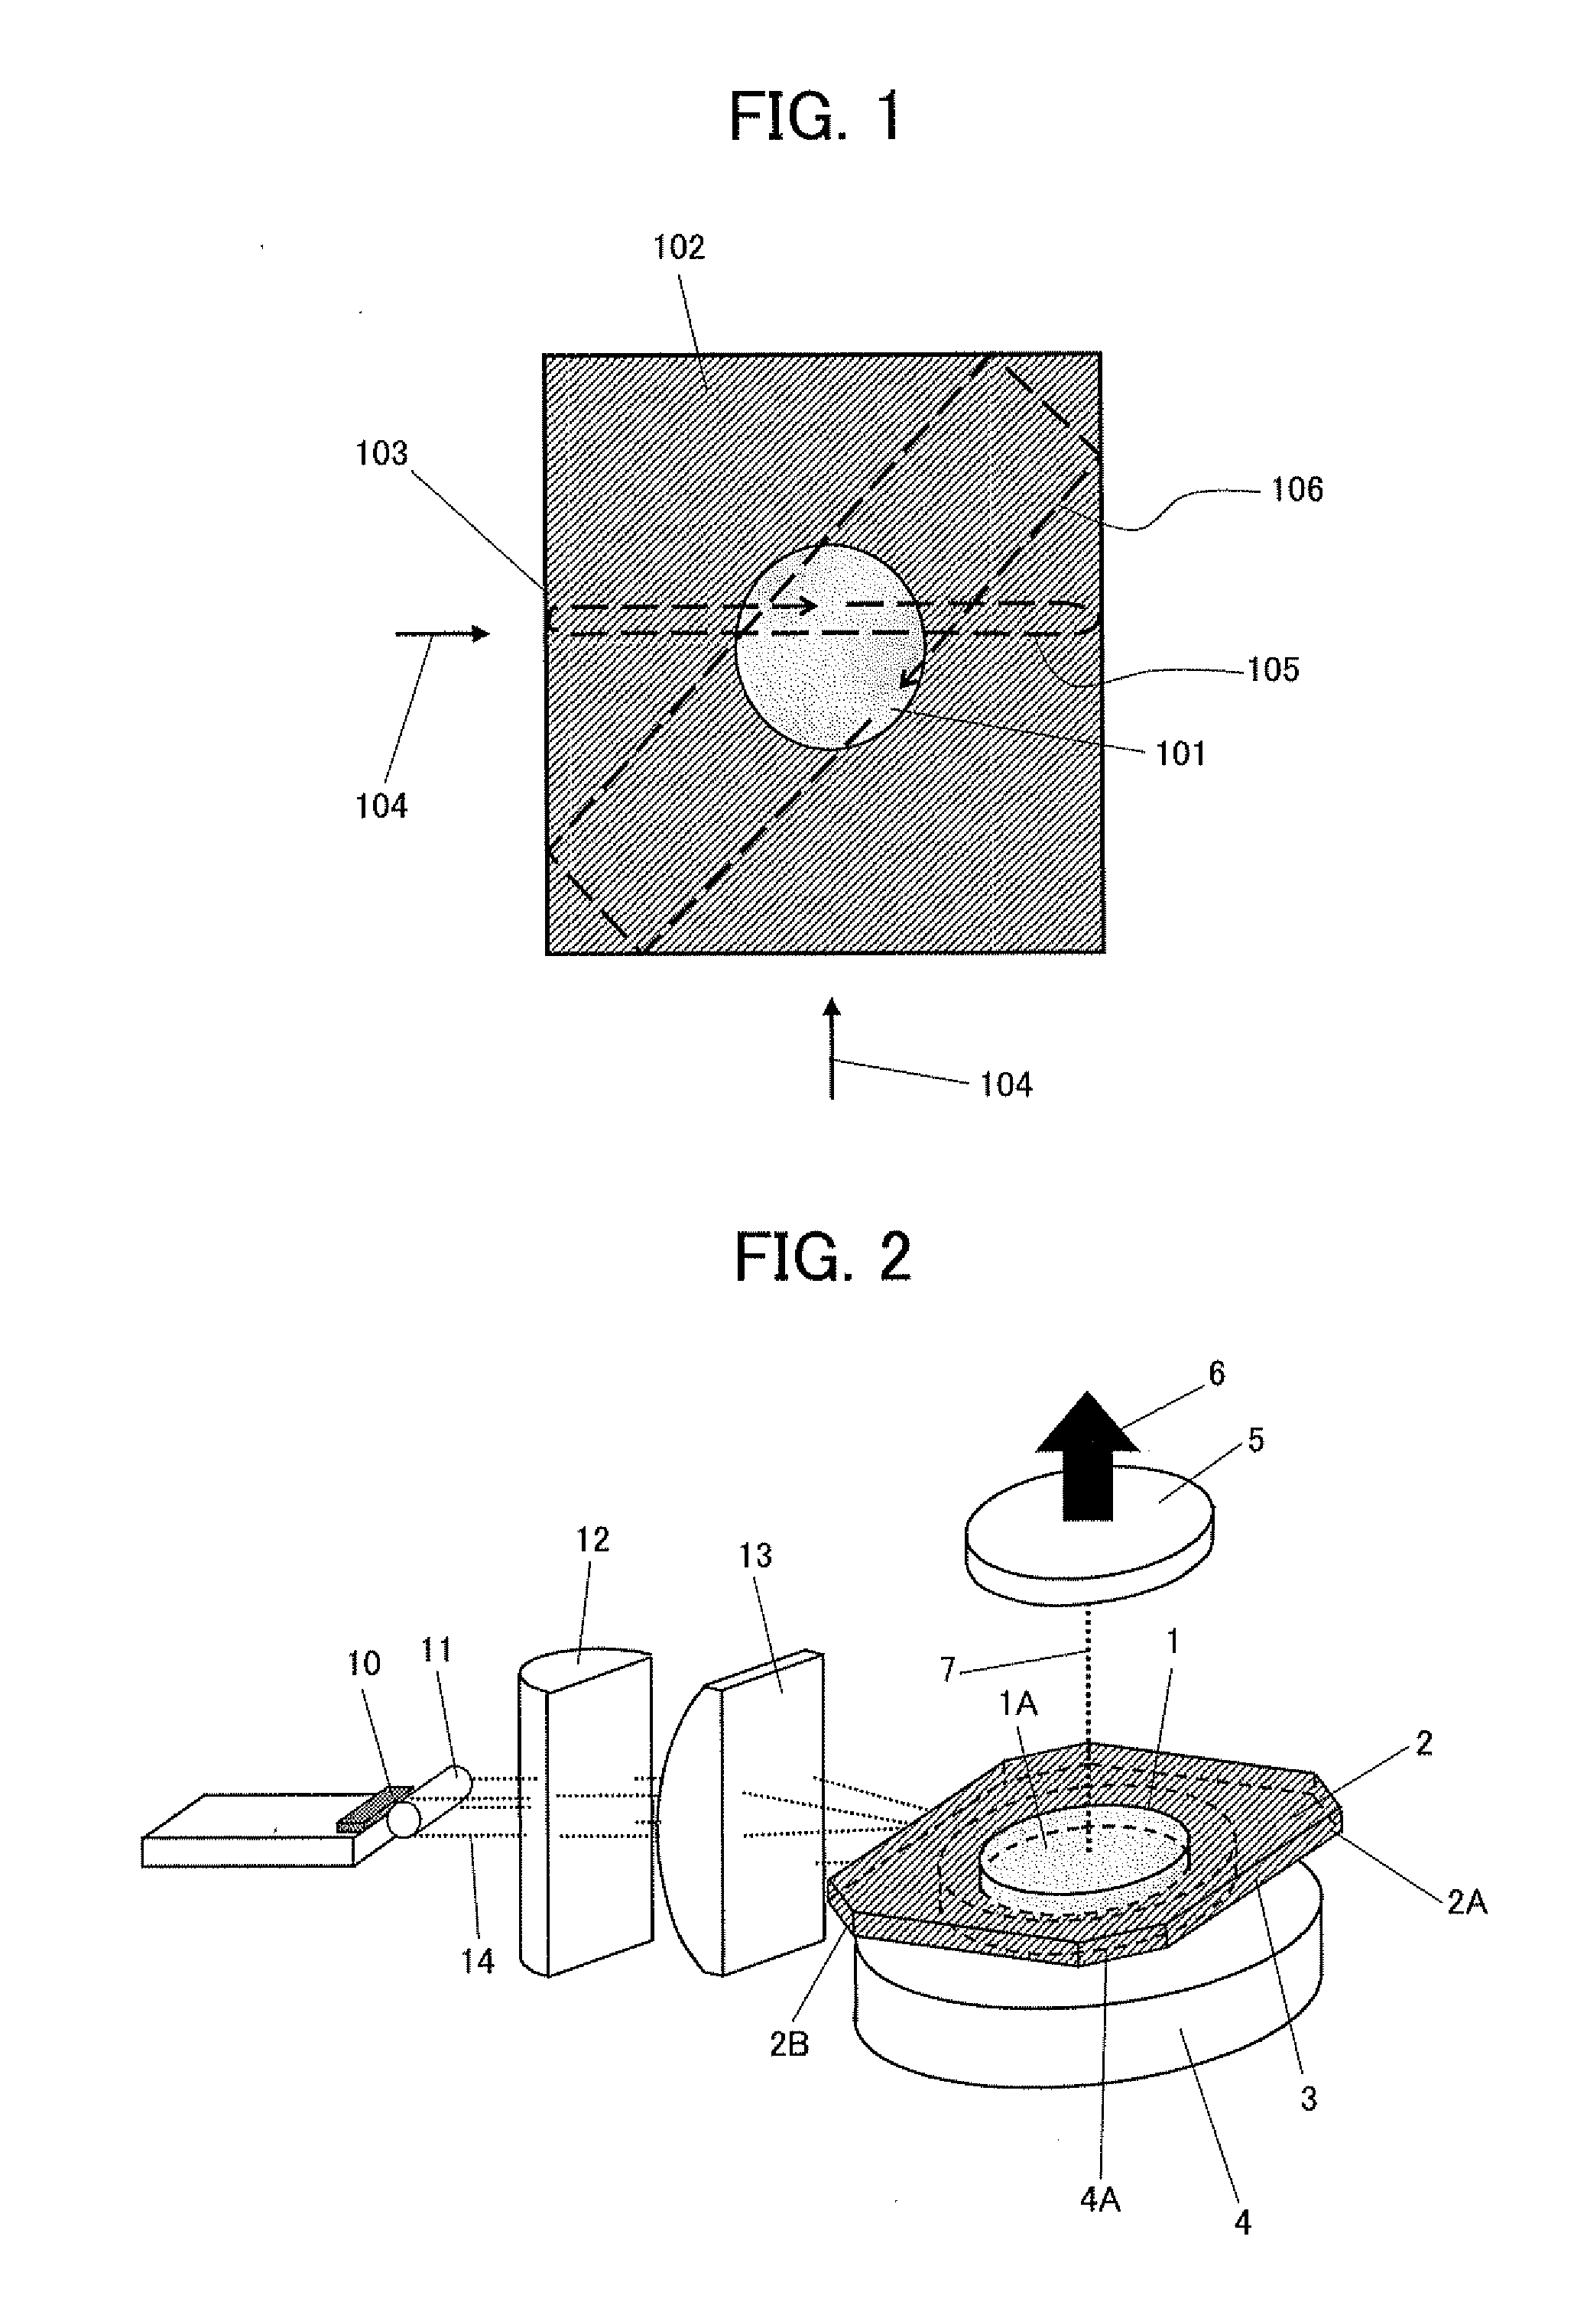 Semiconductor laser pumped solid-state laser device